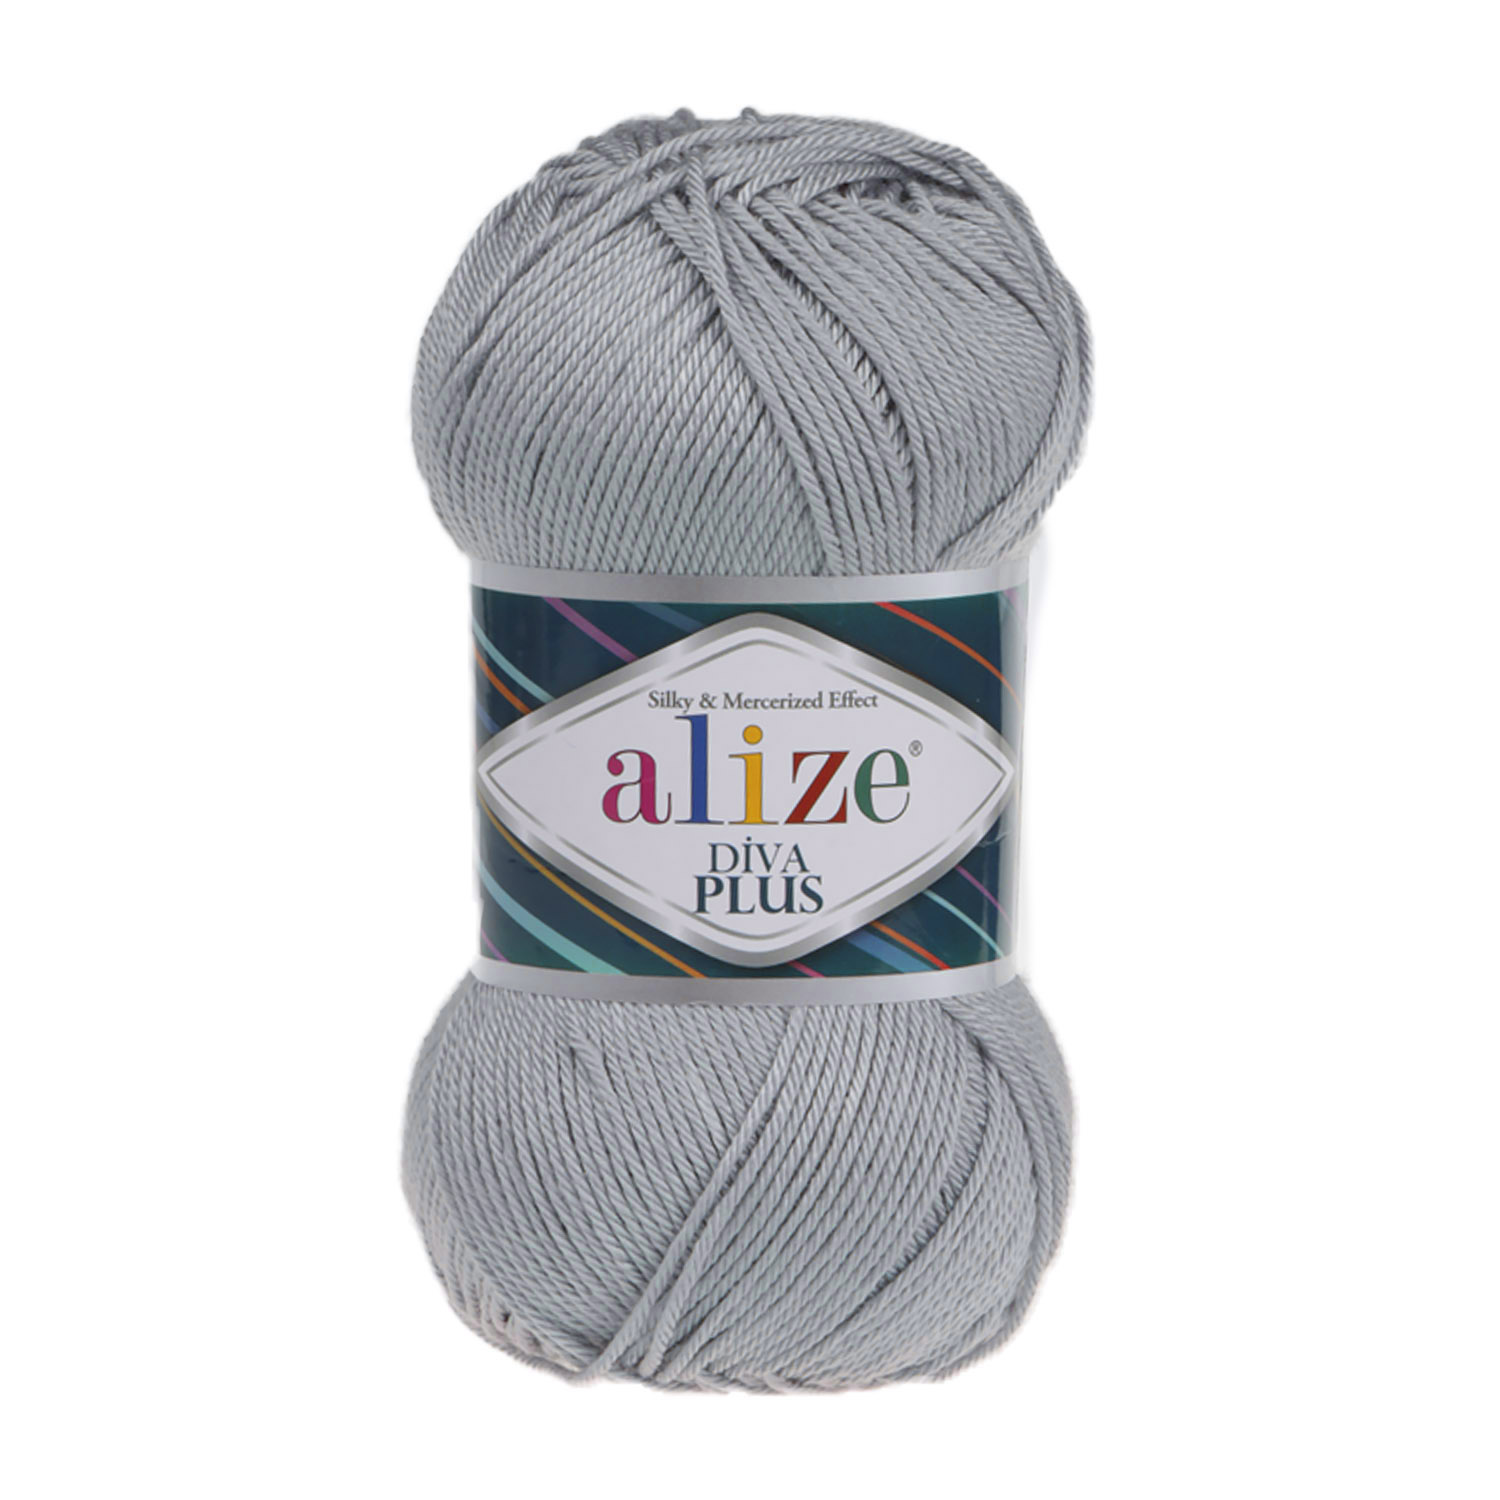 ALIZE PLUS From ALIZE Online | Yarnstreet.com